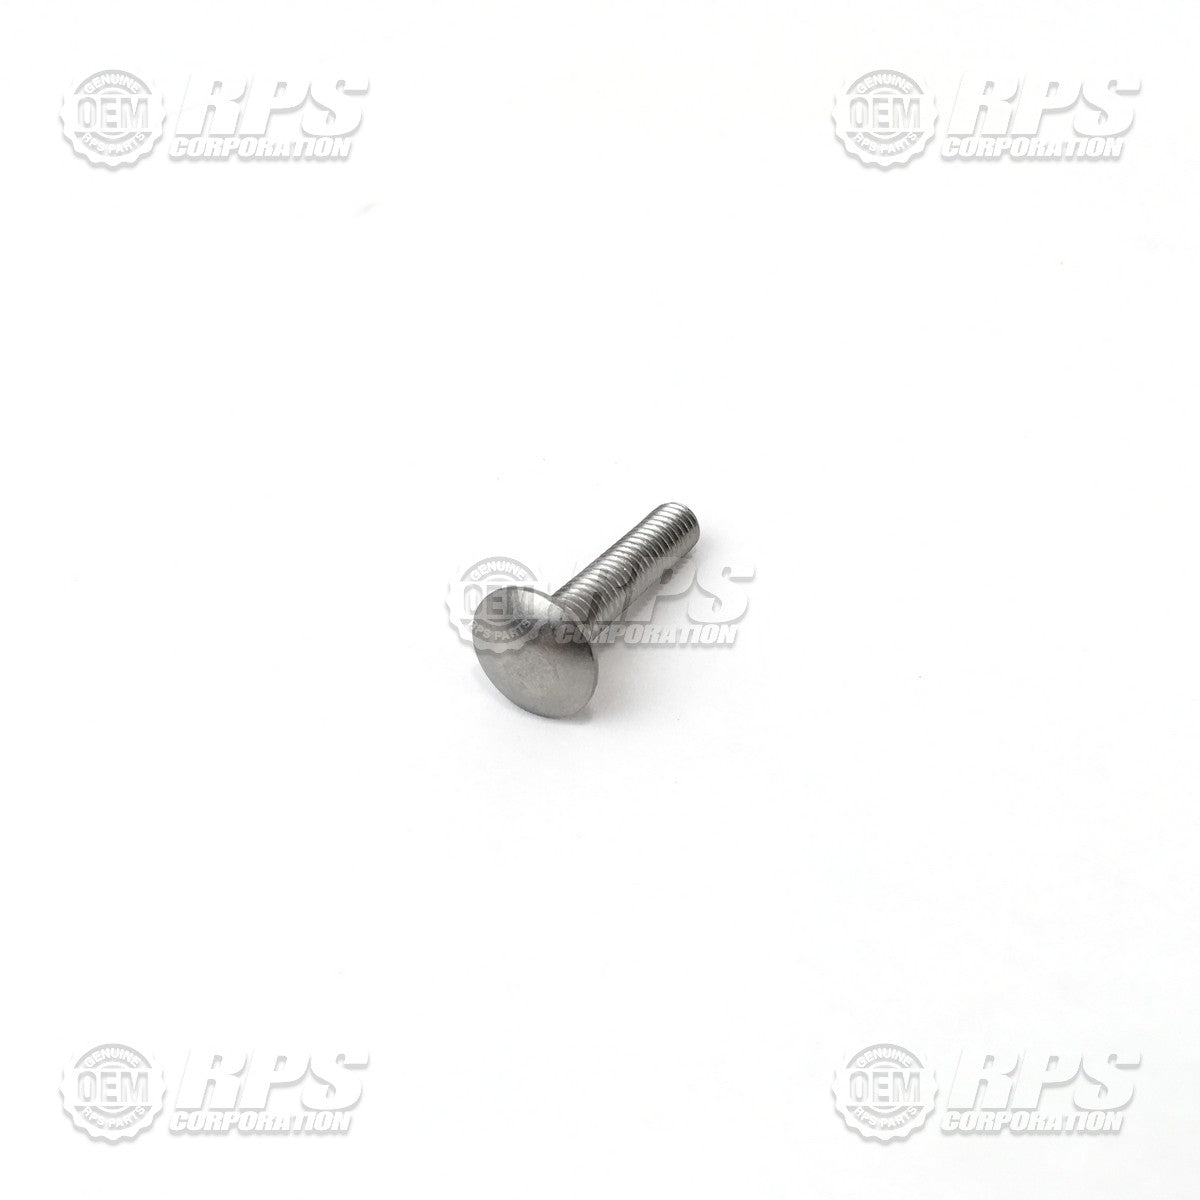 FactoryCat/Tomcat H-74432, Bolt,Carriage,5/16-18x1-1/2" Stainless